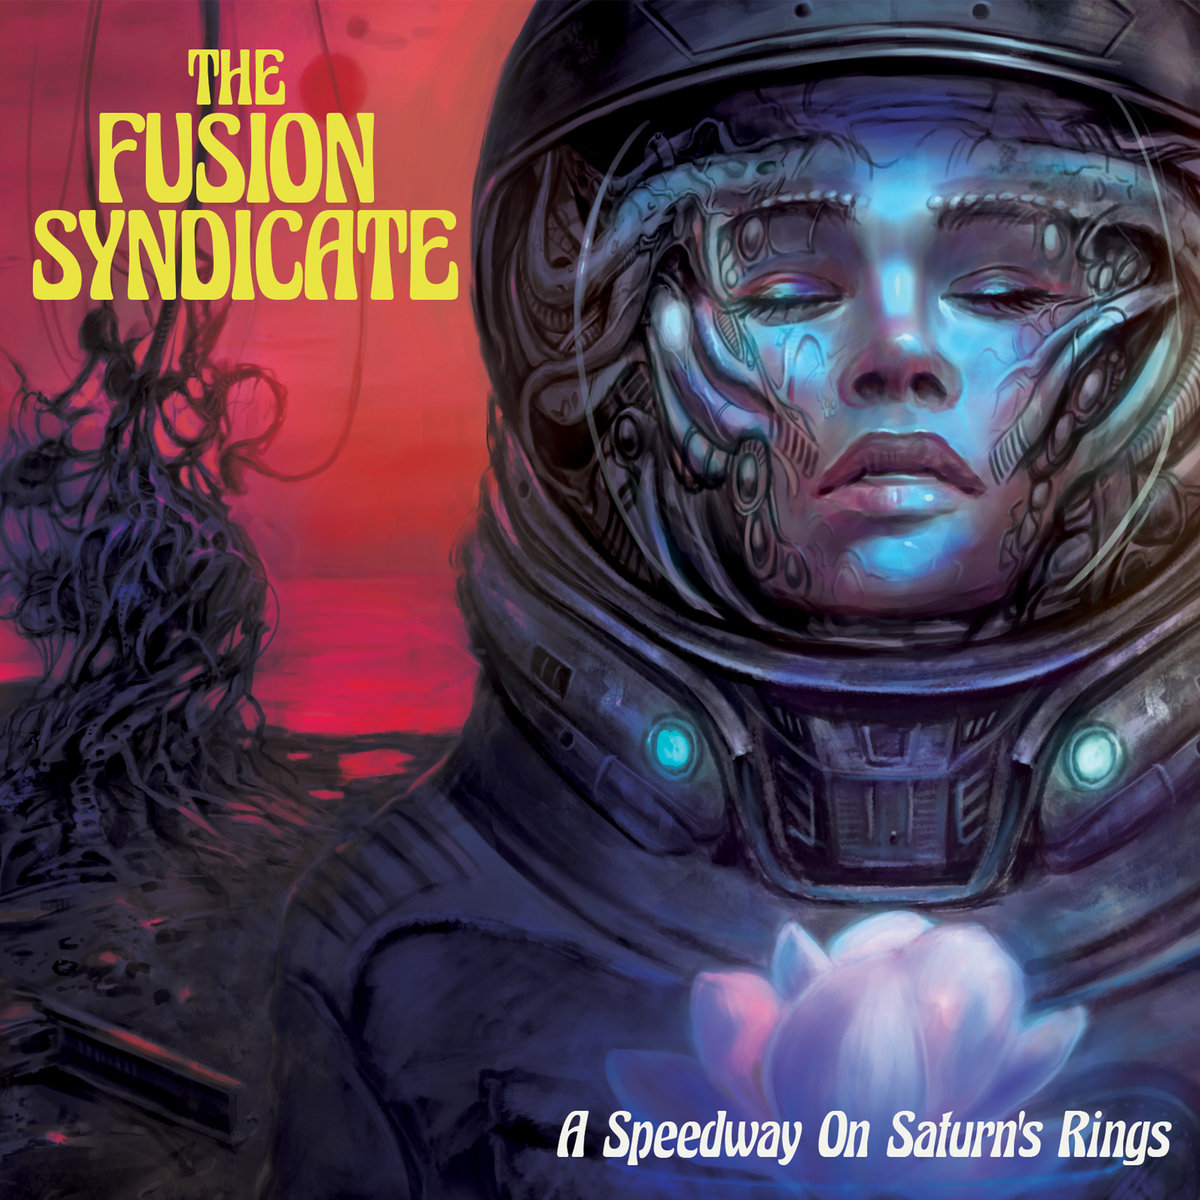 The Fusion Syndicate: l’album “A Speedway On Saturn’s Rings” – COMPRA